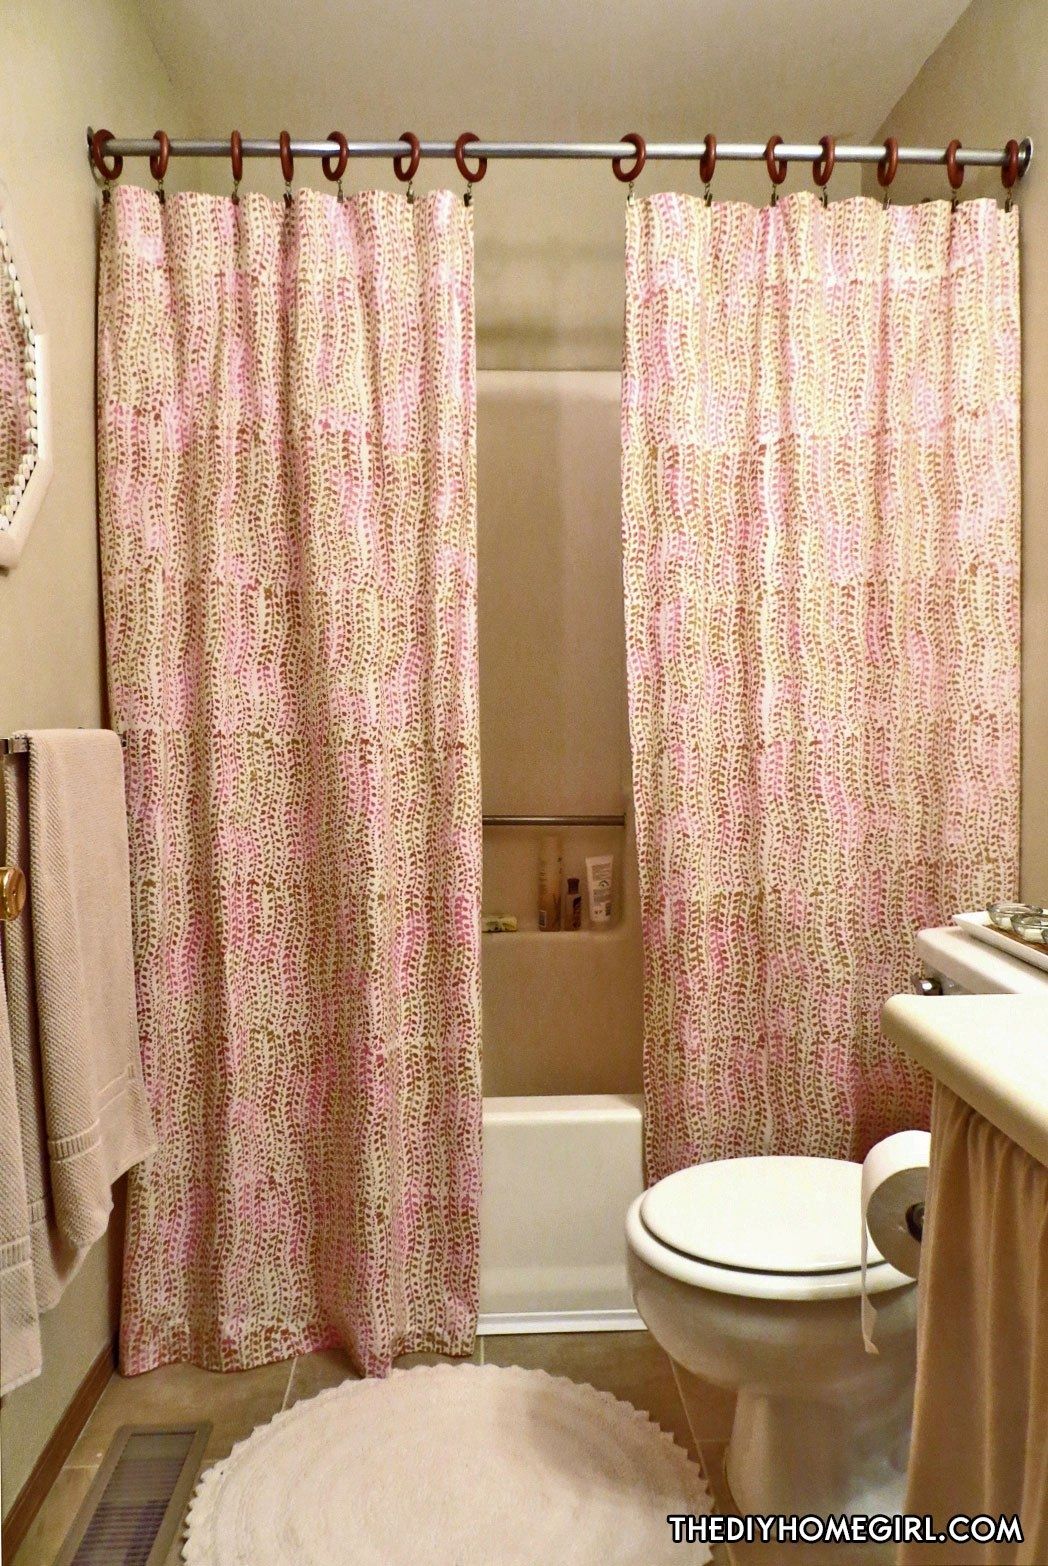 Two Panel Shower Curtain A Plus Design Reference Regarding Double Panel Shower Curtains (View 1 of 25)